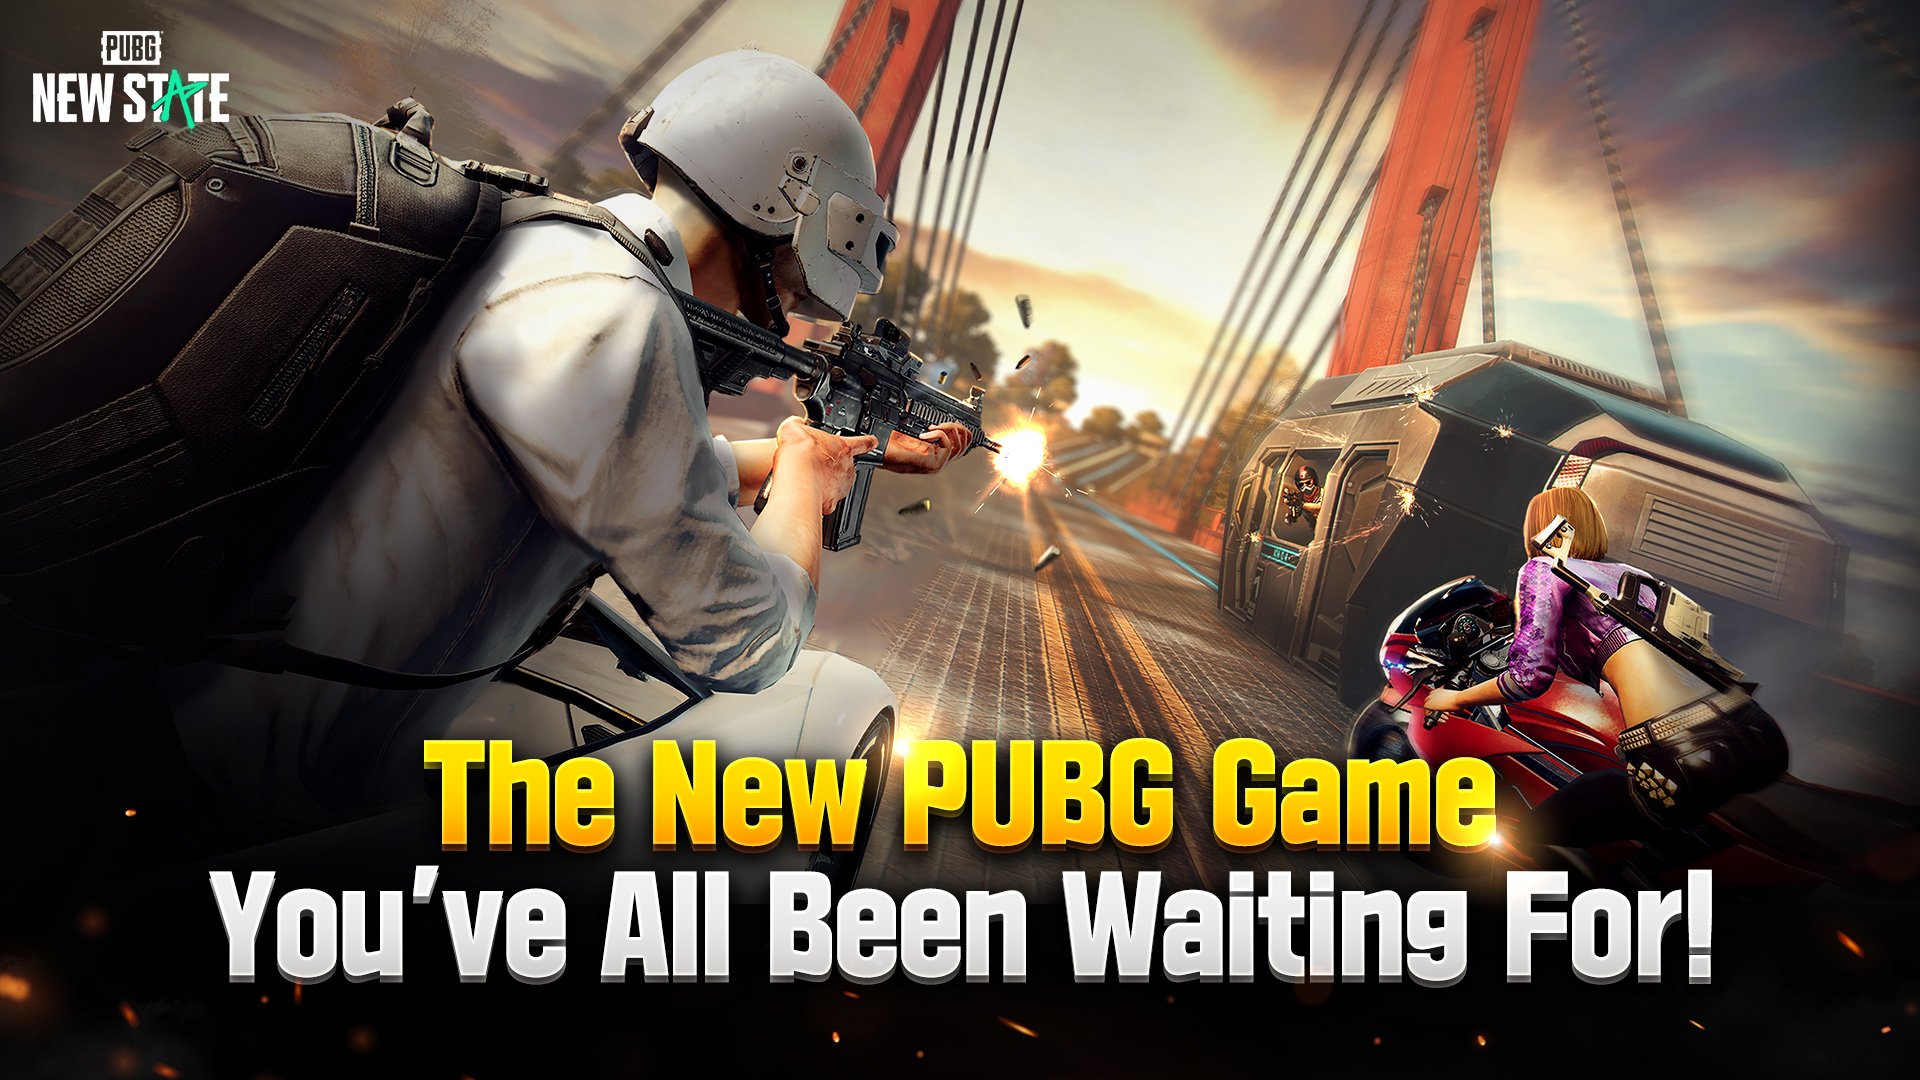 PUBG: NHow To PUBG New State APK Download? - A Guide For Android Usersew State APK Download - A Guide For Android Users